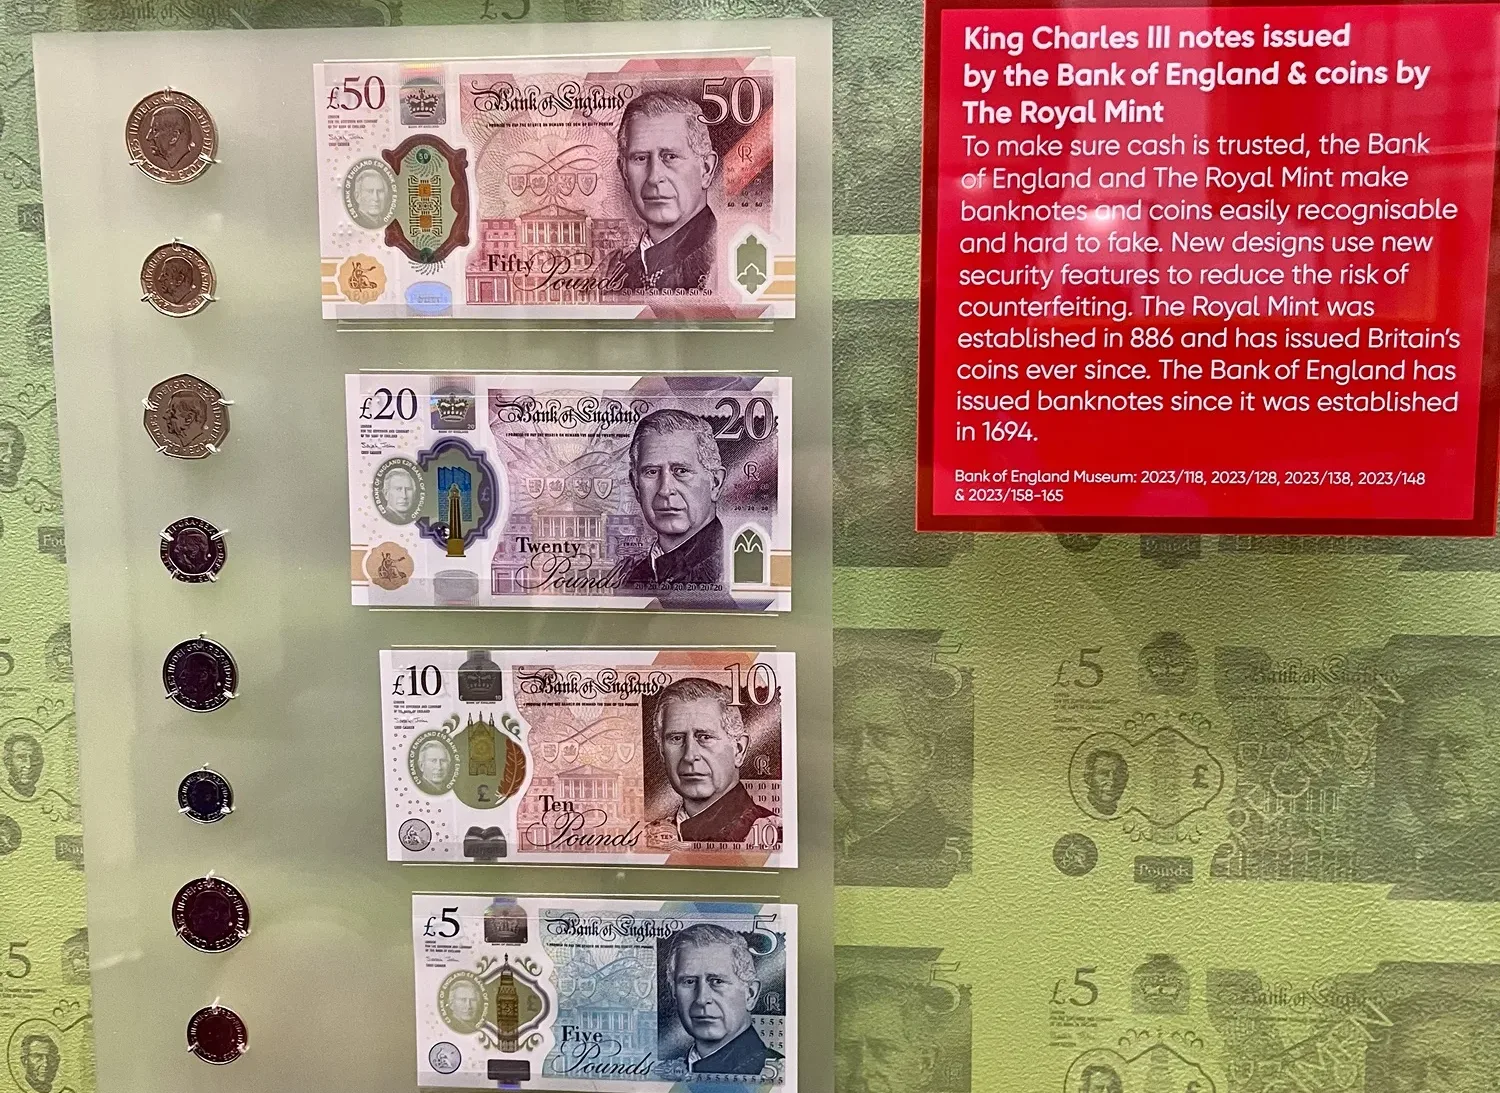 A photo of the new King Charles coins and bank notes at the Bank of England Museum in London